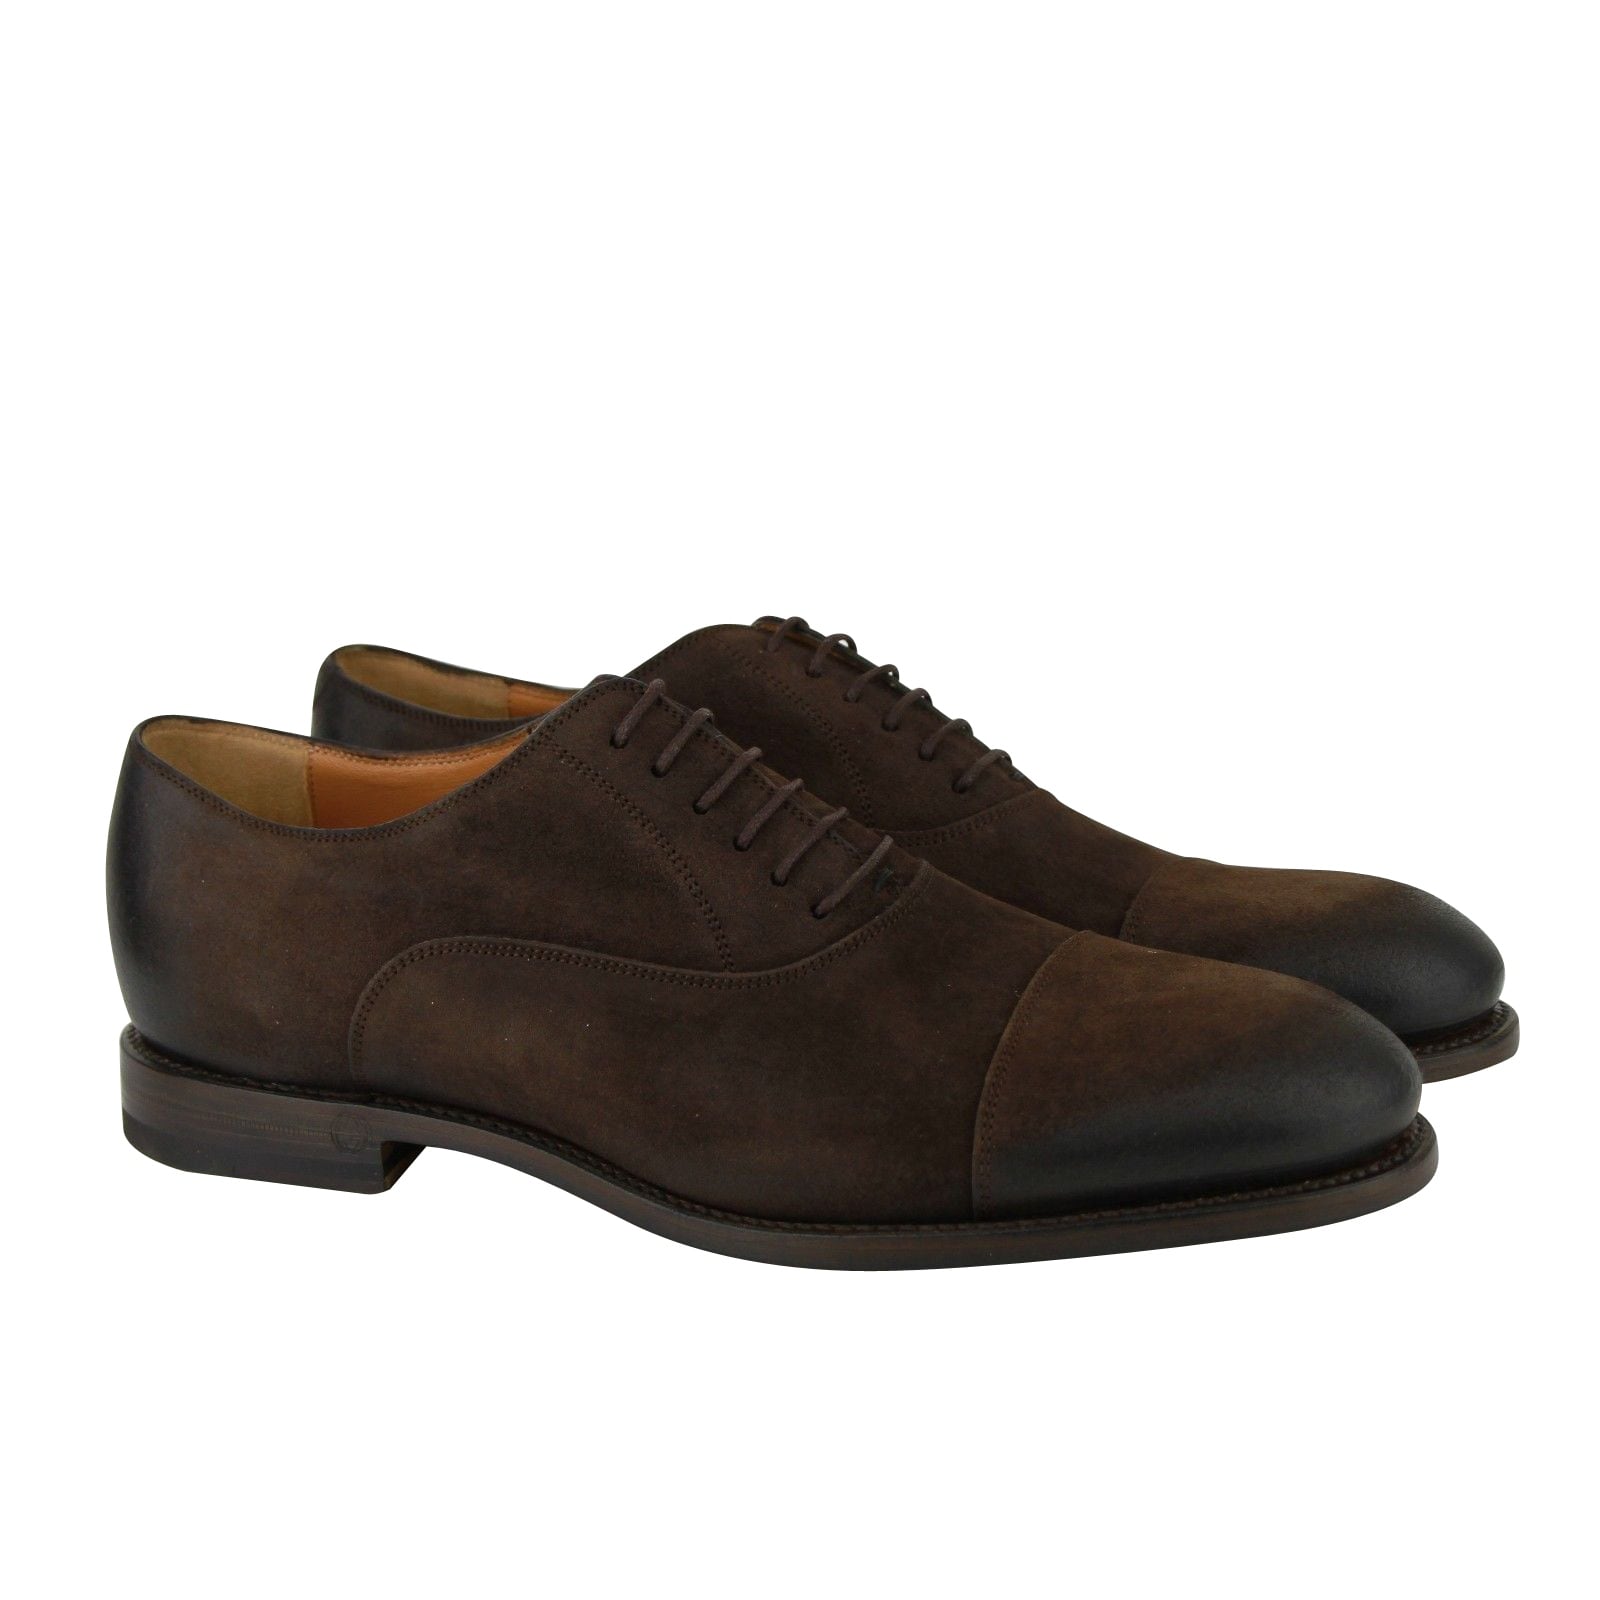 Brown Suede Leather Oxford Shoes 282754 